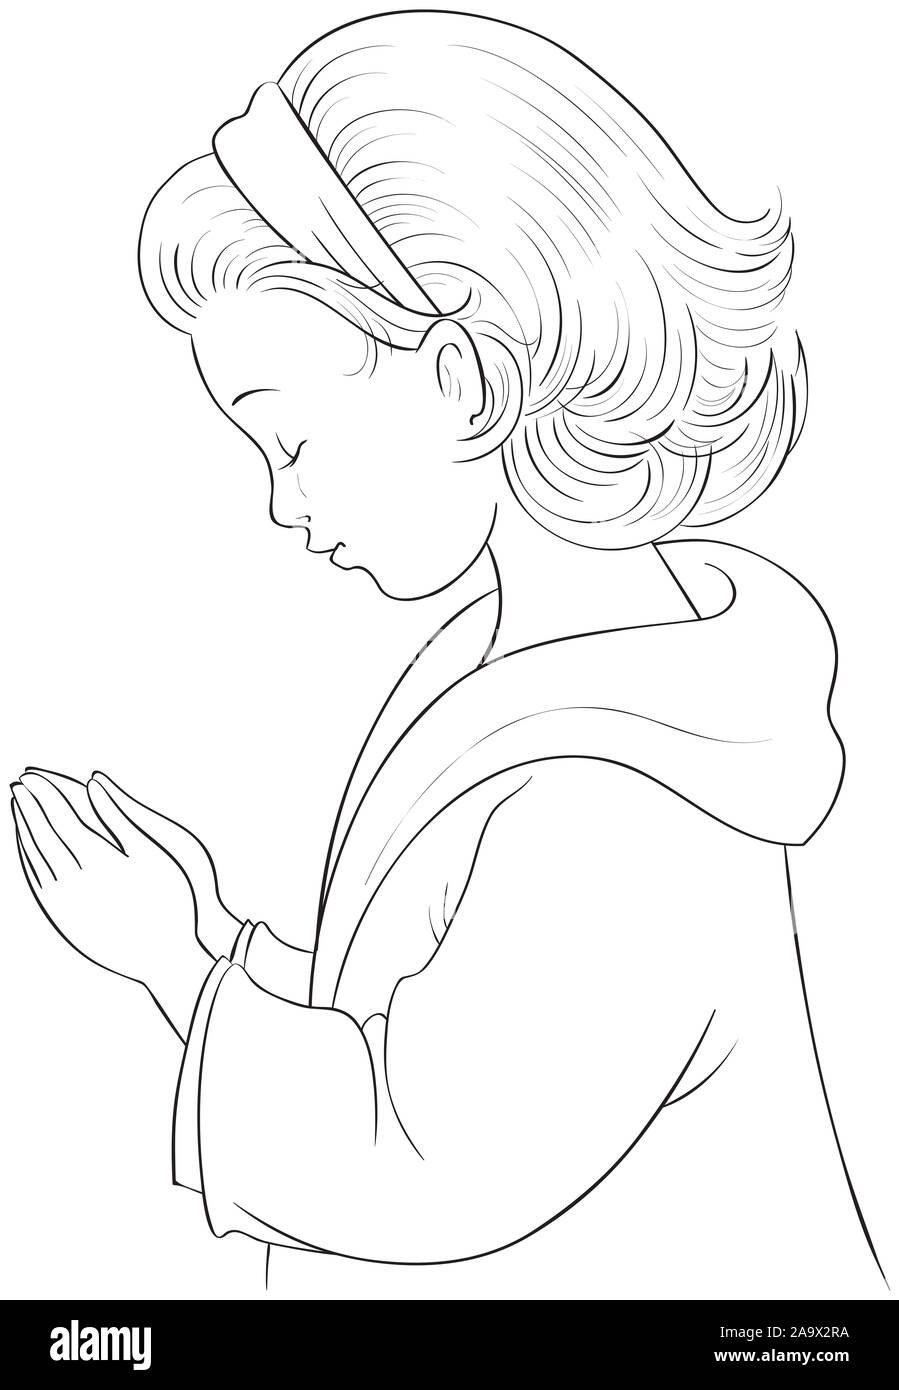 Cute Cartoon Little Girl praying with her hands folded coloring page Stock Photo